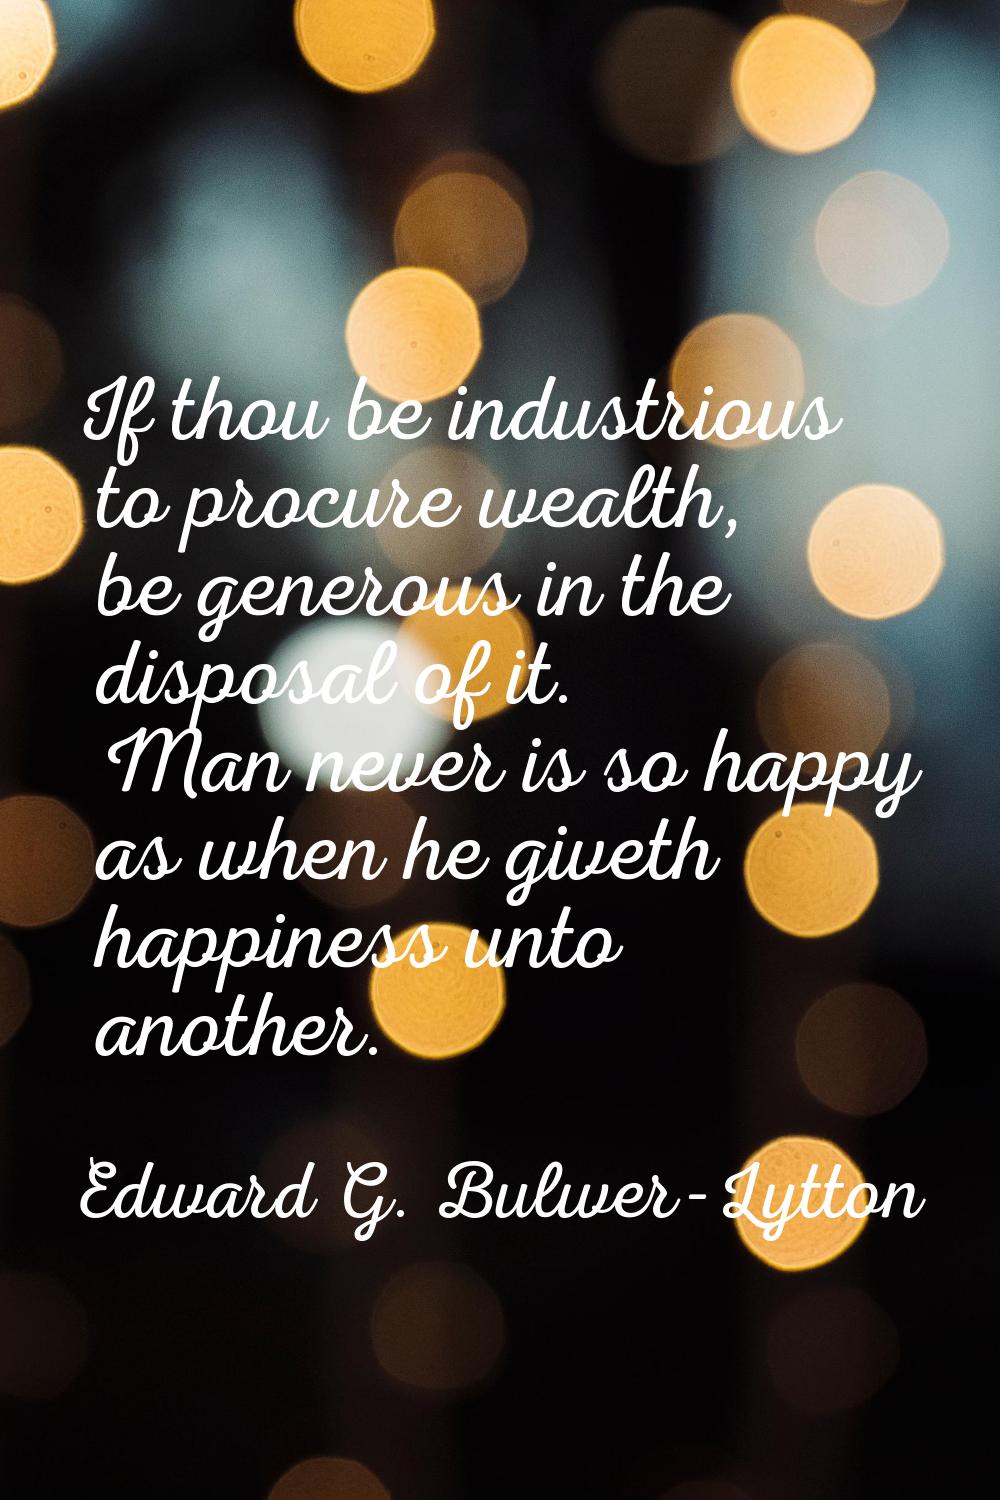 If thou be industrious to procure wealth, be generous in the disposal of it. Man never is so happy 